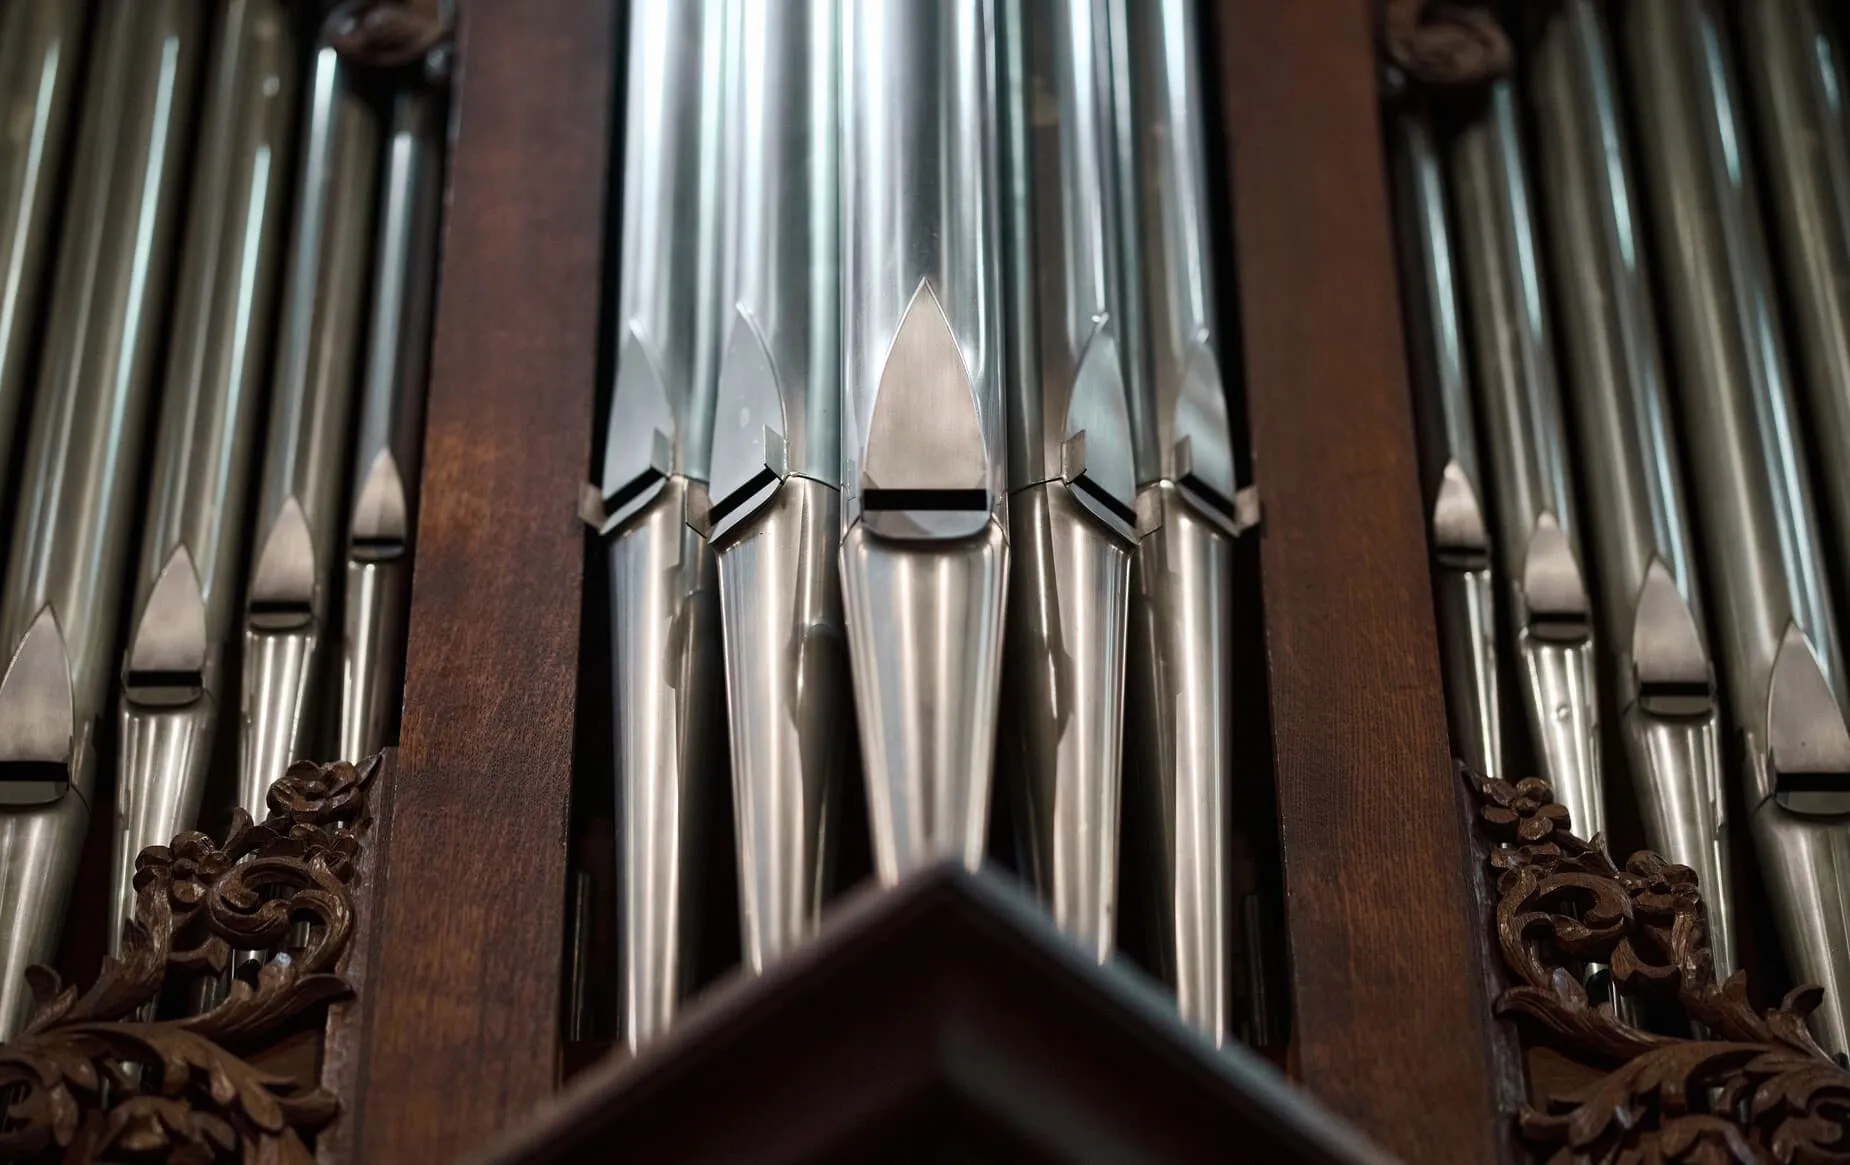 Organ pipes in the Cathedral